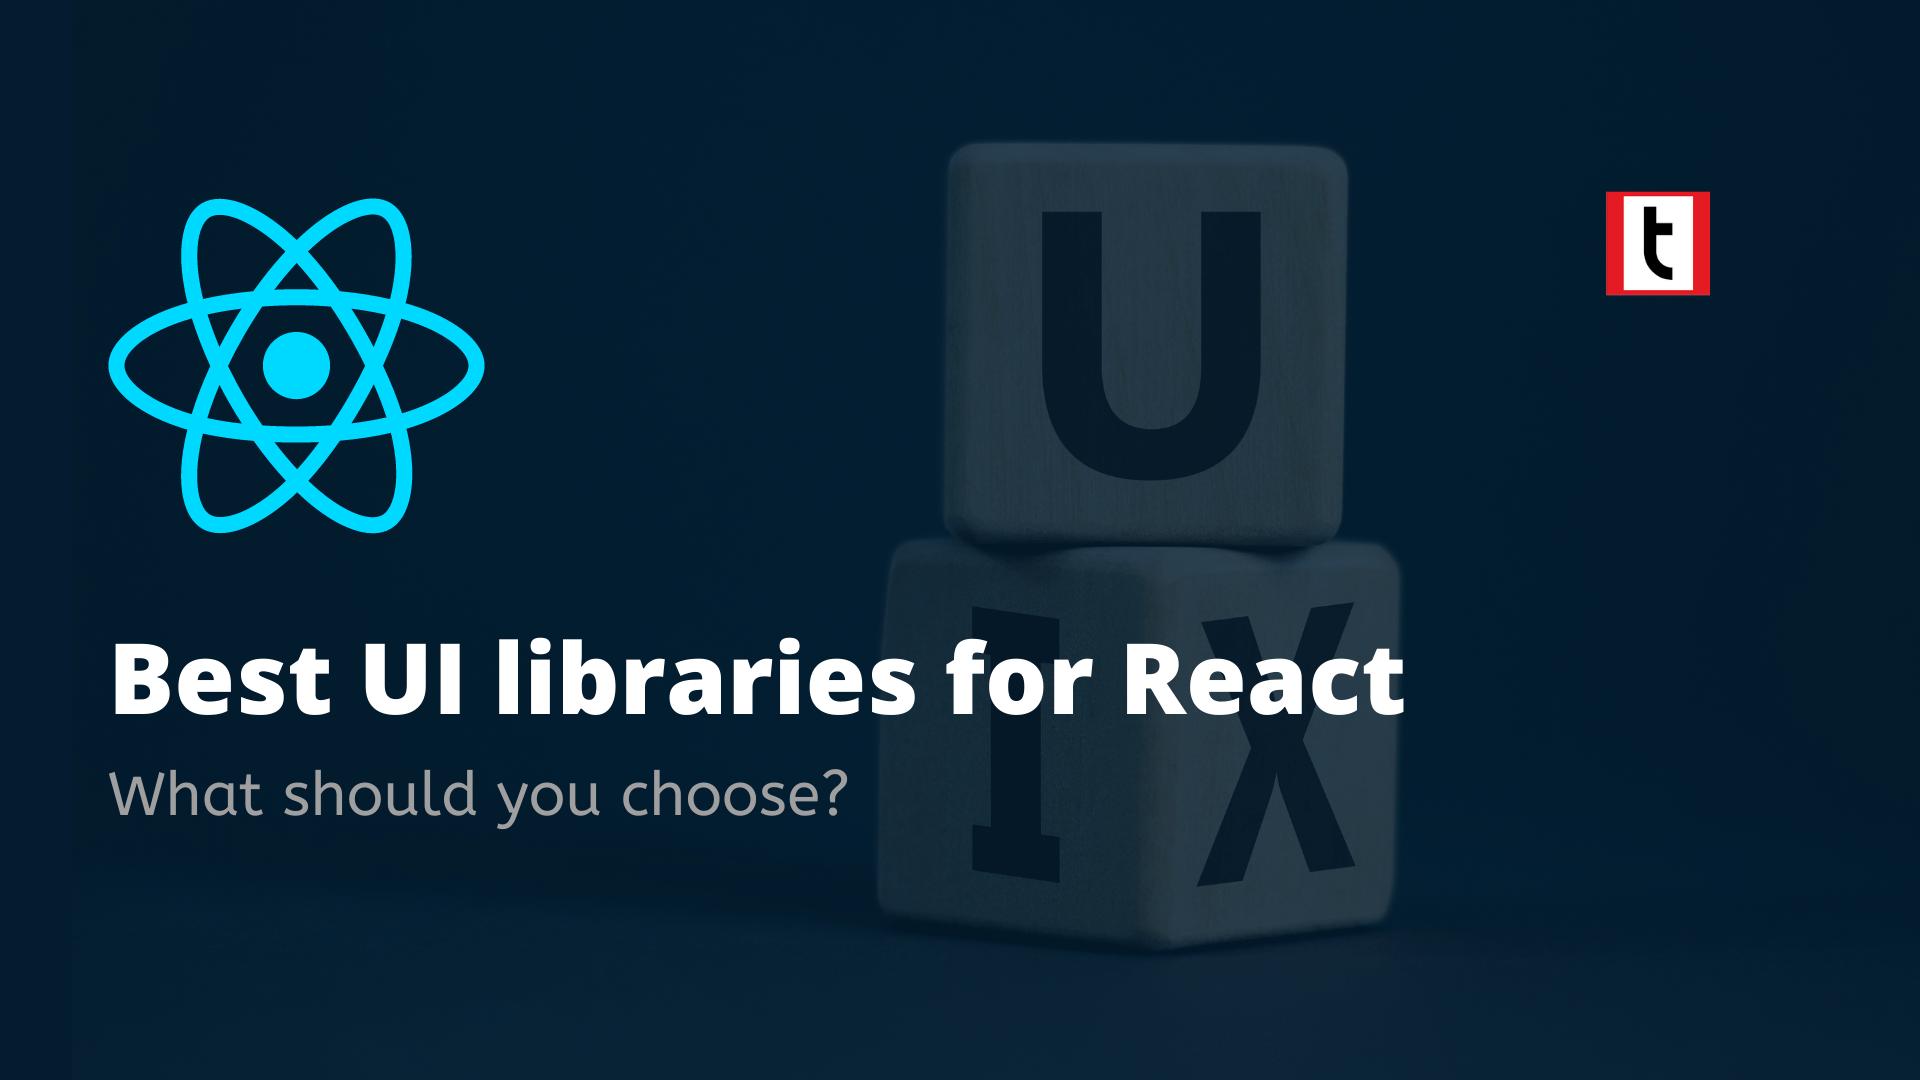 Best UI libraries for React